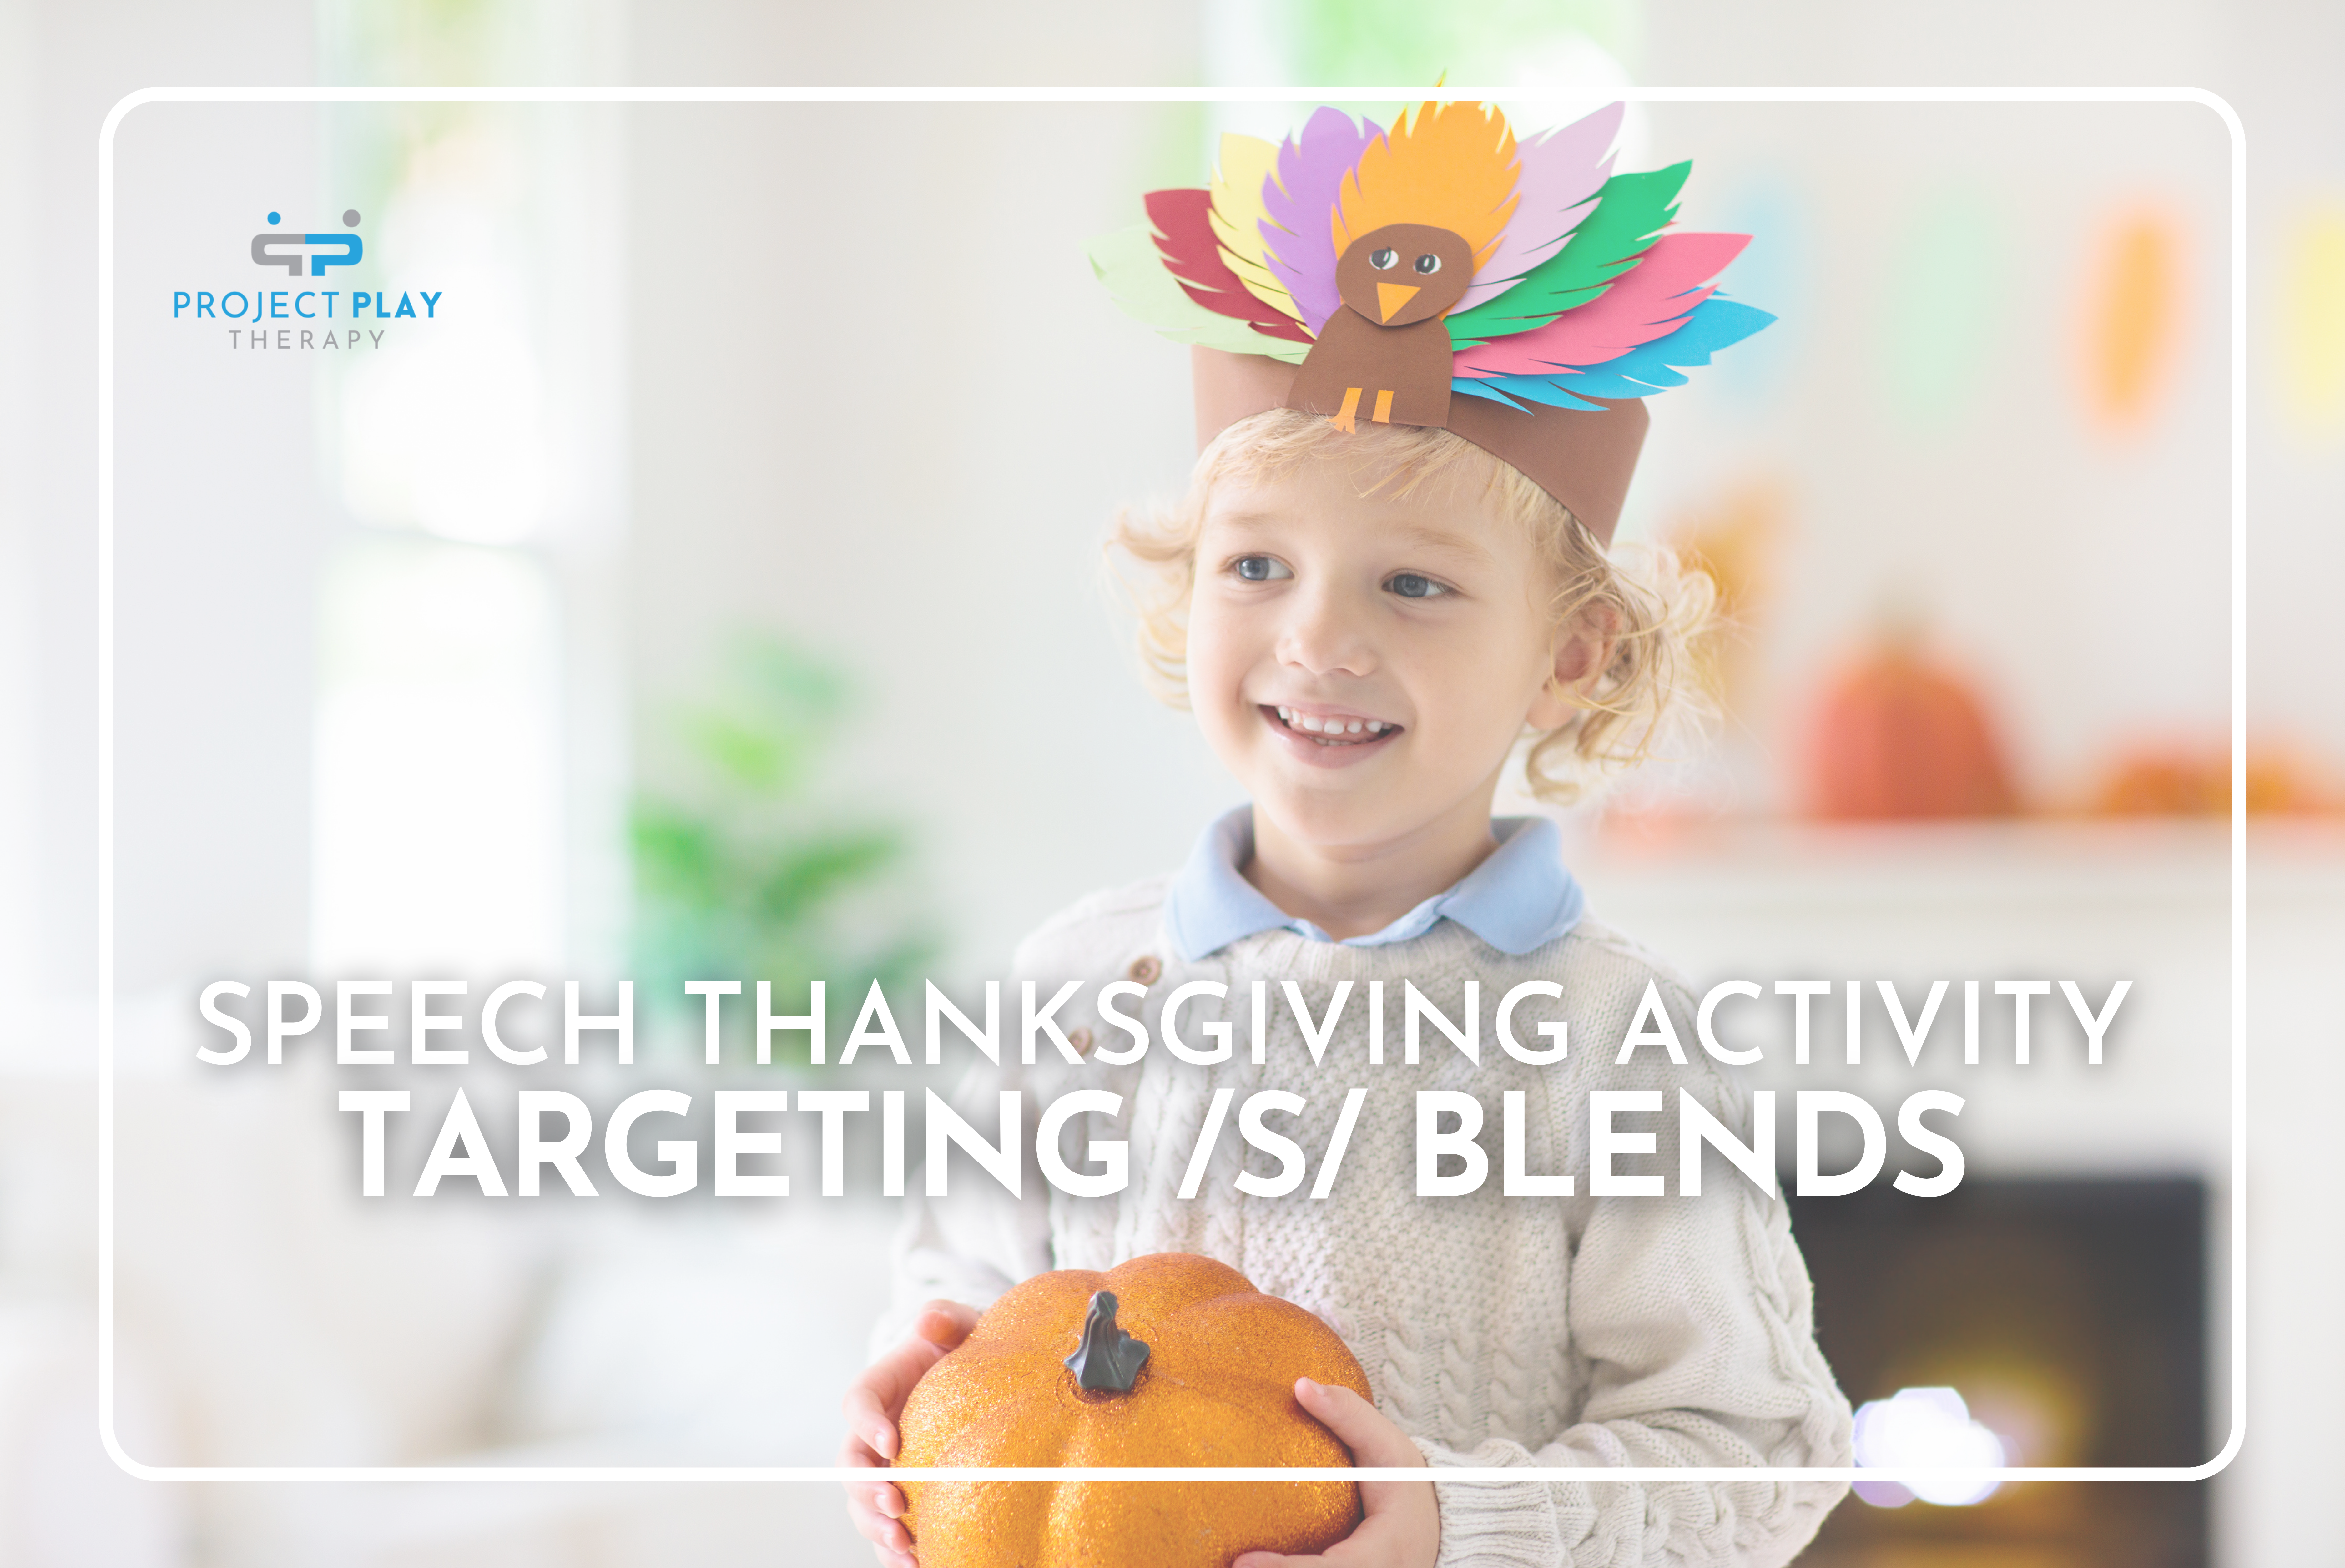 Thanksgiving-Themed Activity to Target /s/ Blends 